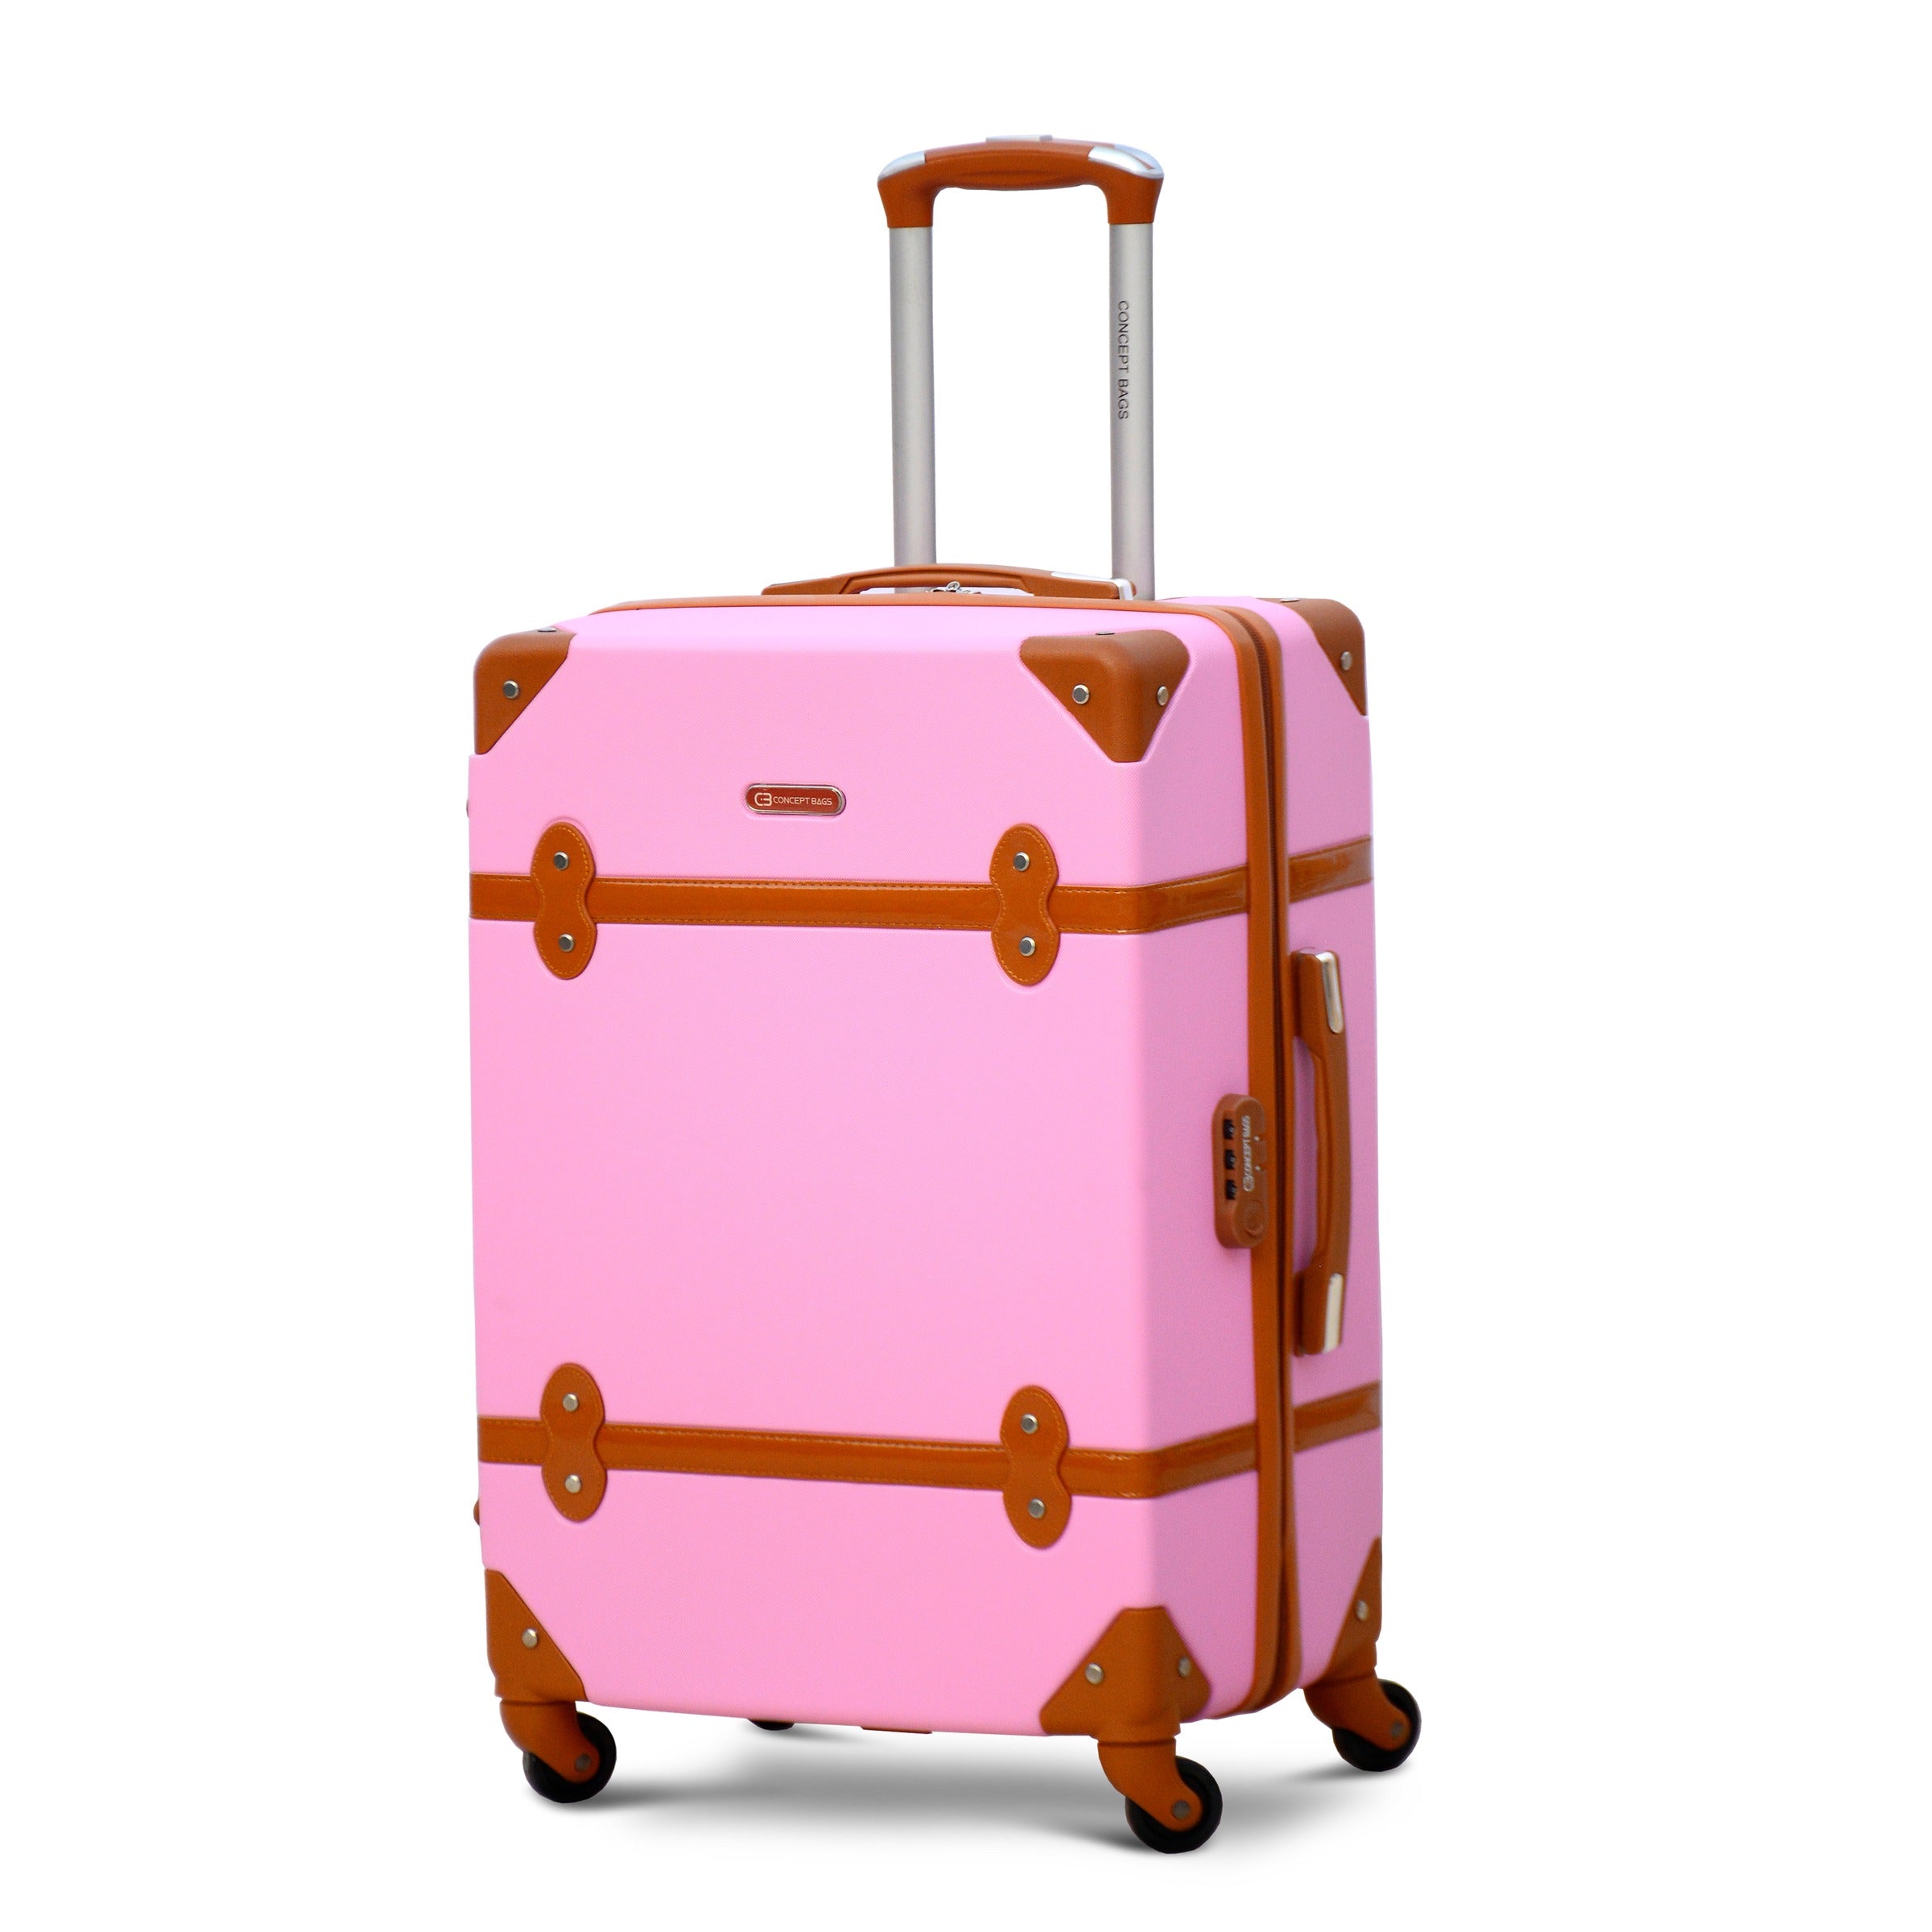 24" Corner Guard Pink and Brown Lightweight ABS Luggage Bag With Spinner Wheel